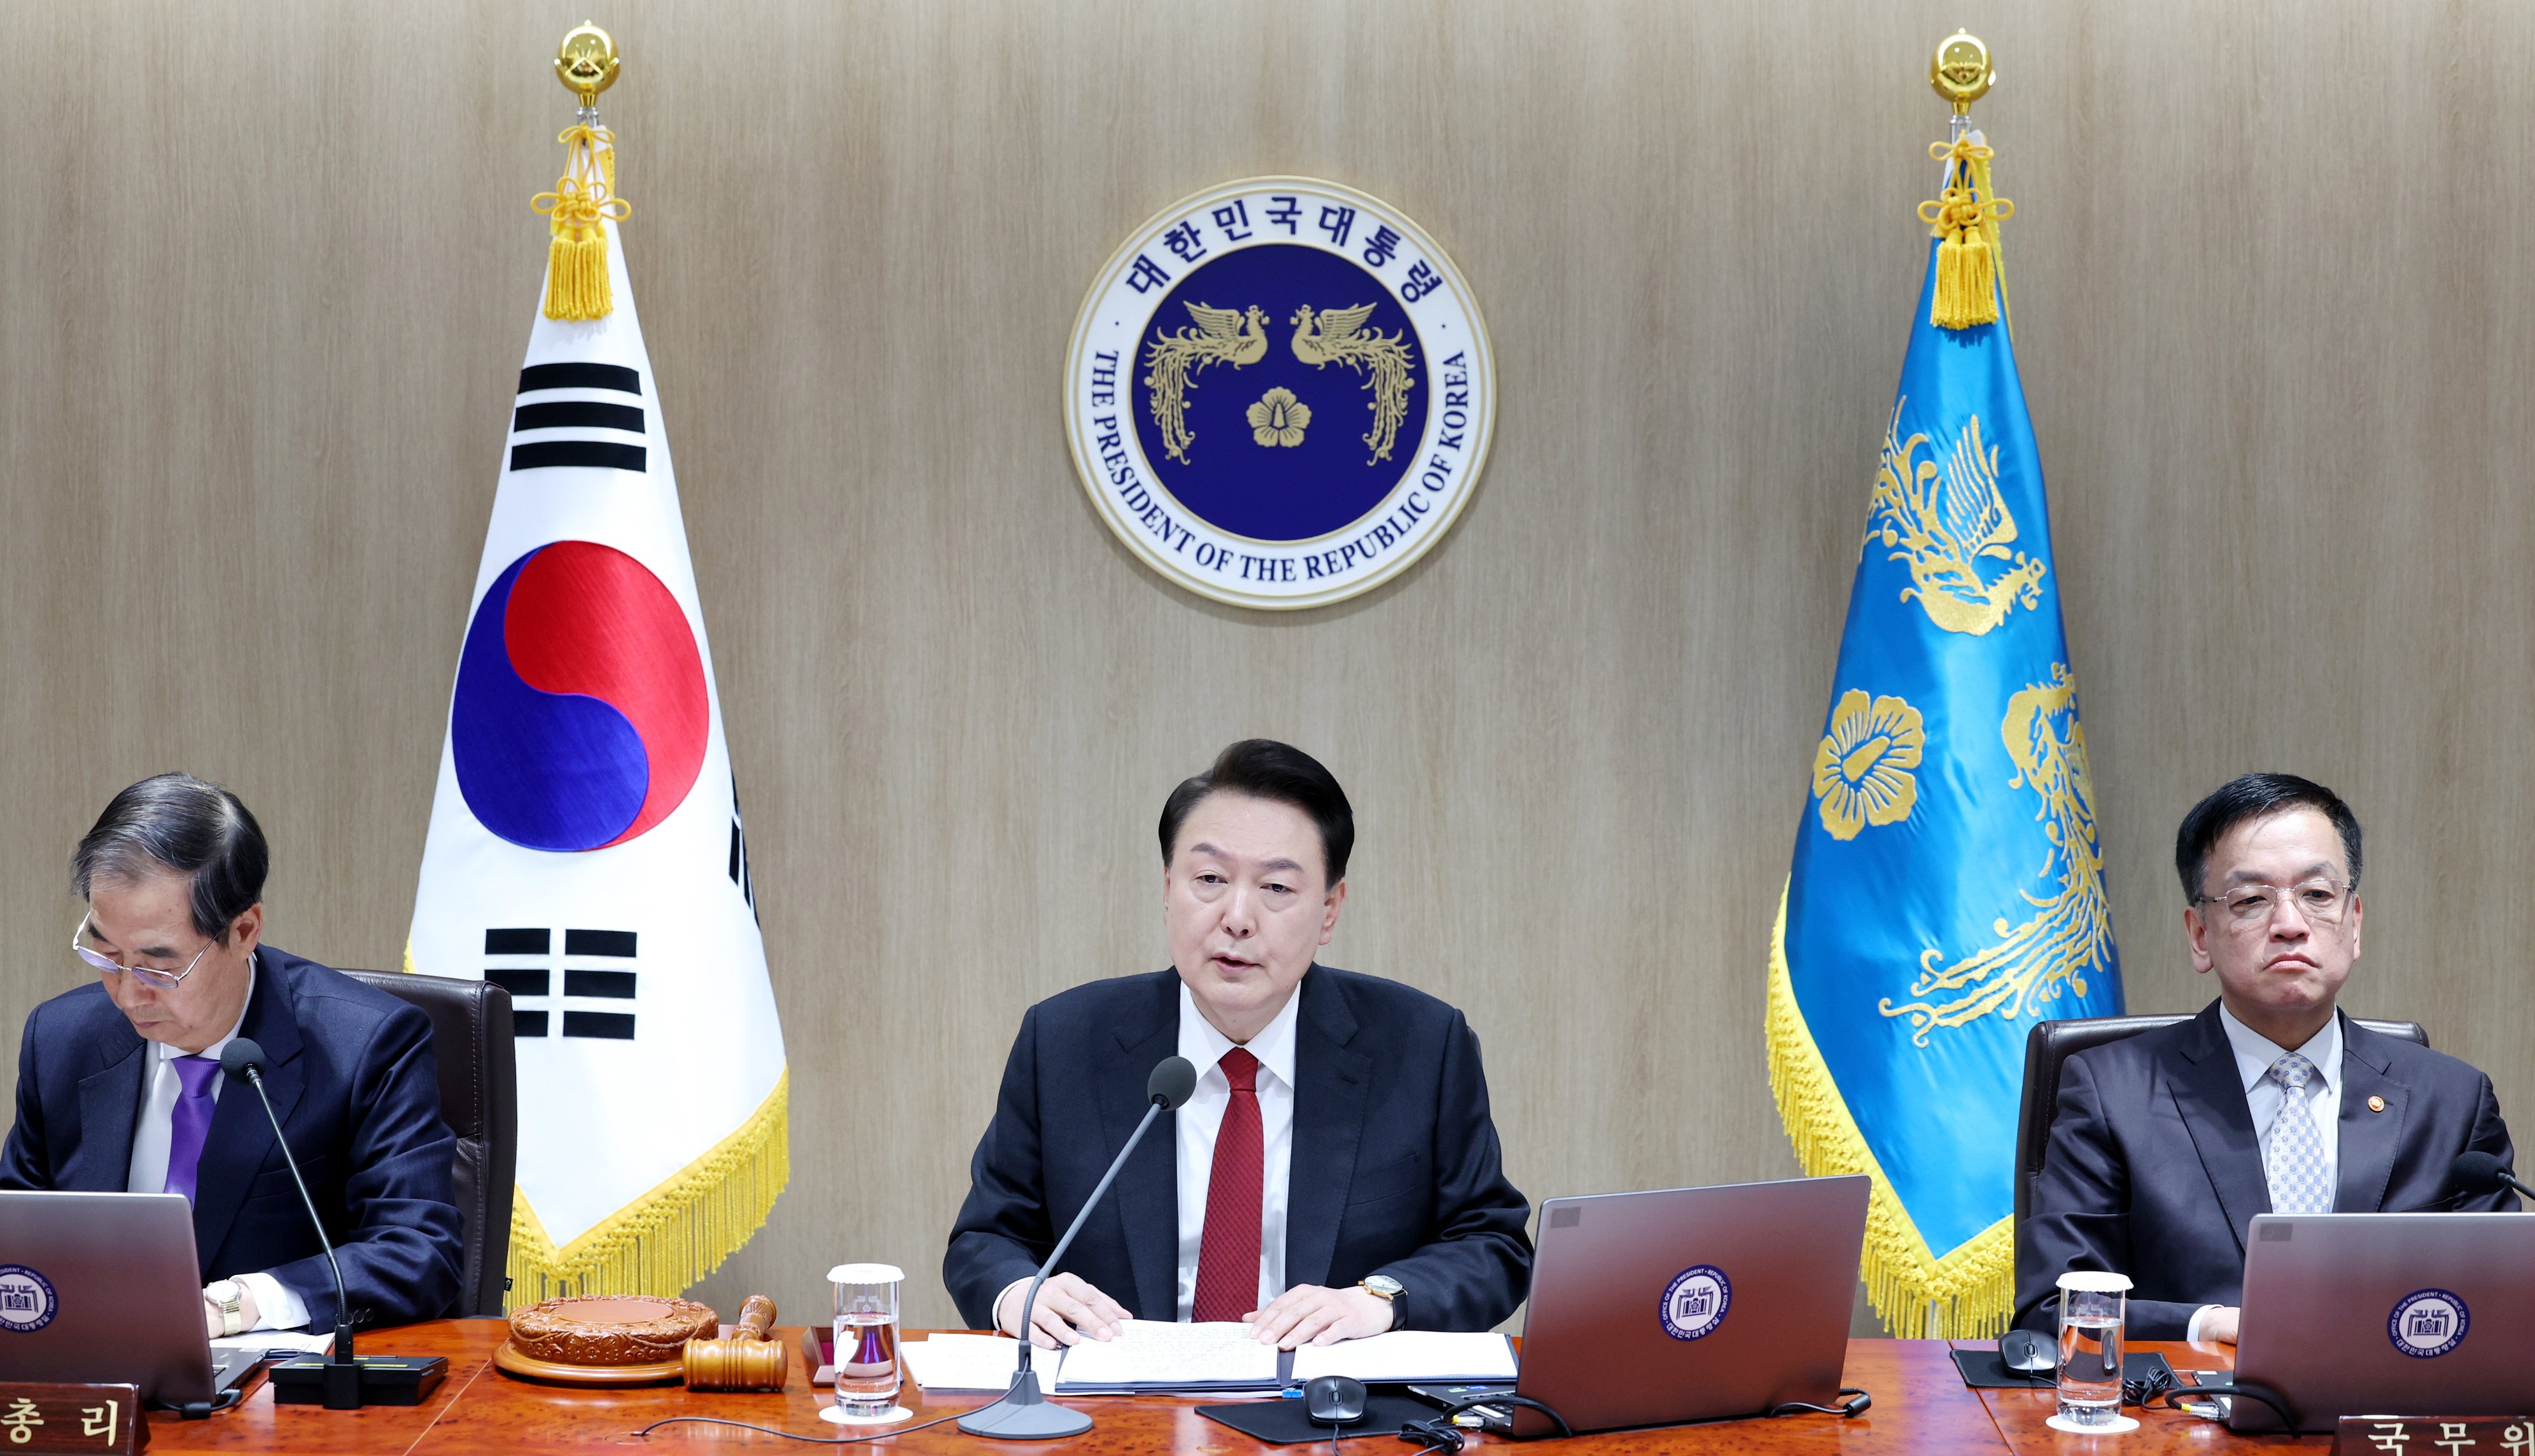 South Korean President Yoon Suk-yeol speaks during a cabinet meeting at the presidential office in Seoul on Tuesday. Photo: Yonhap/via EPA-EFE